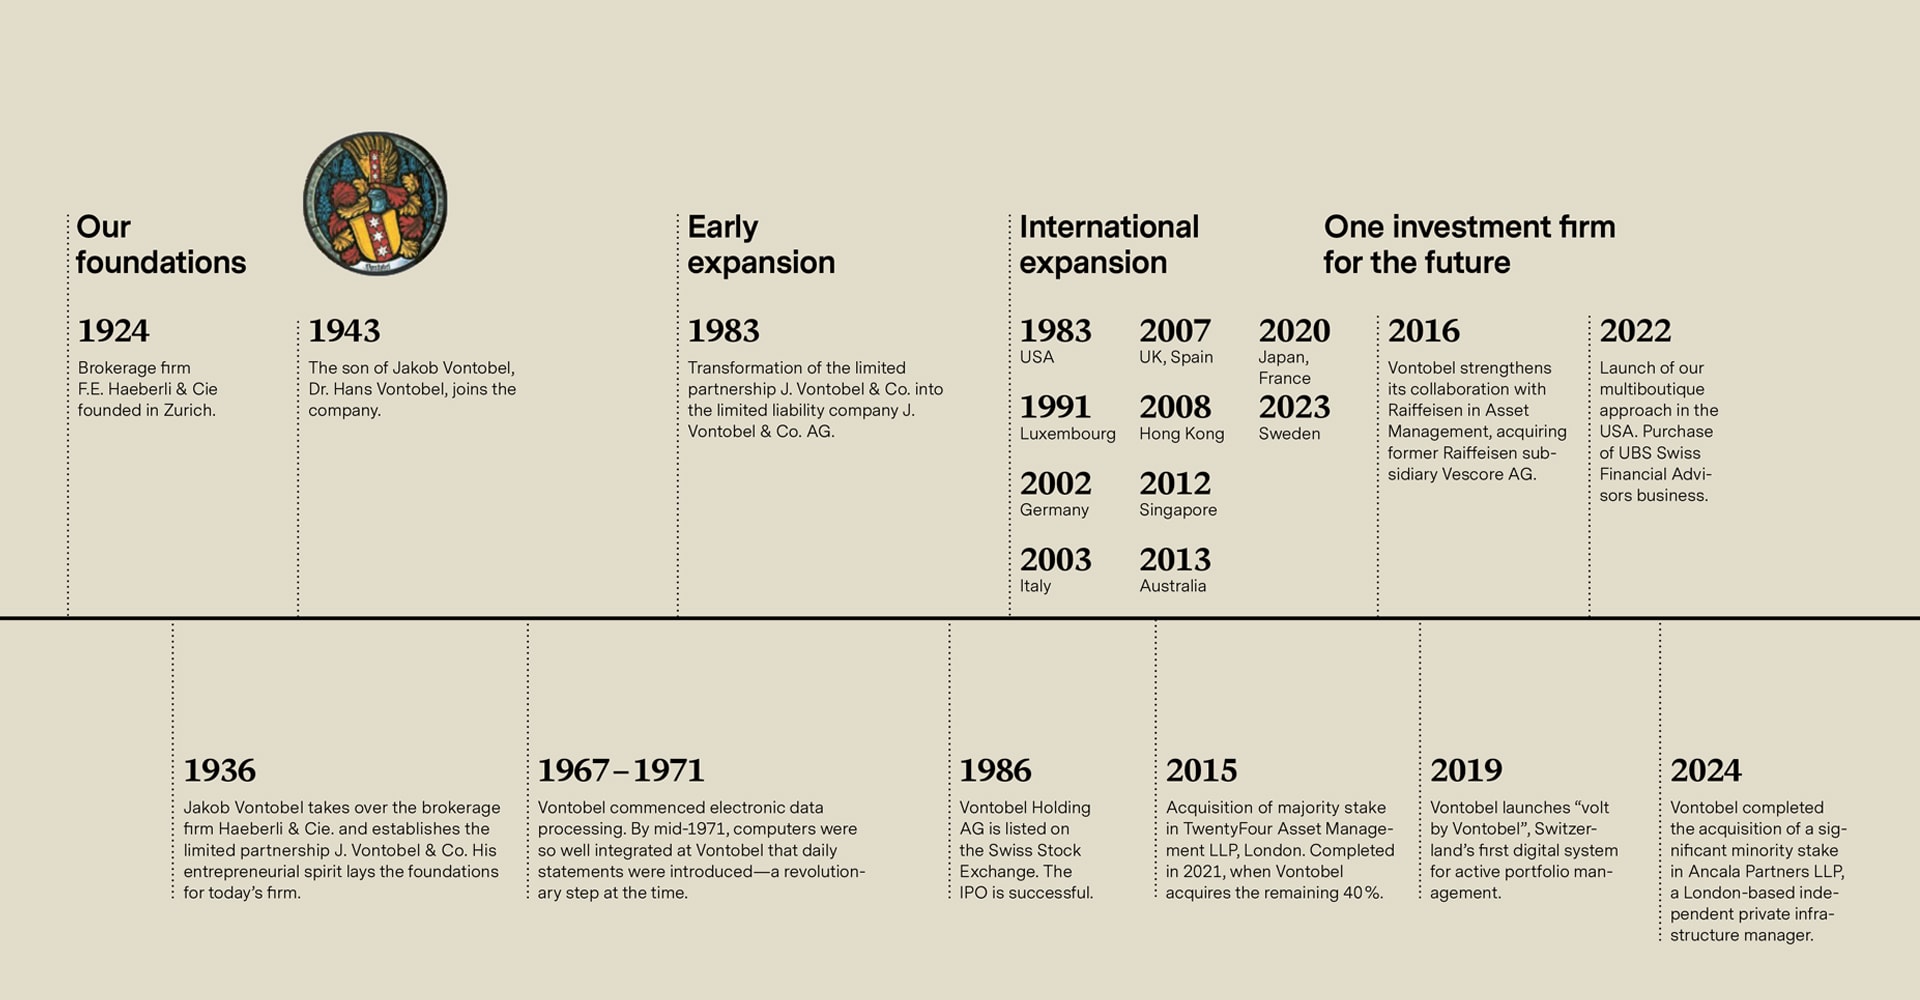 Vontobel's corporate history - timeline from 1924 to 2022